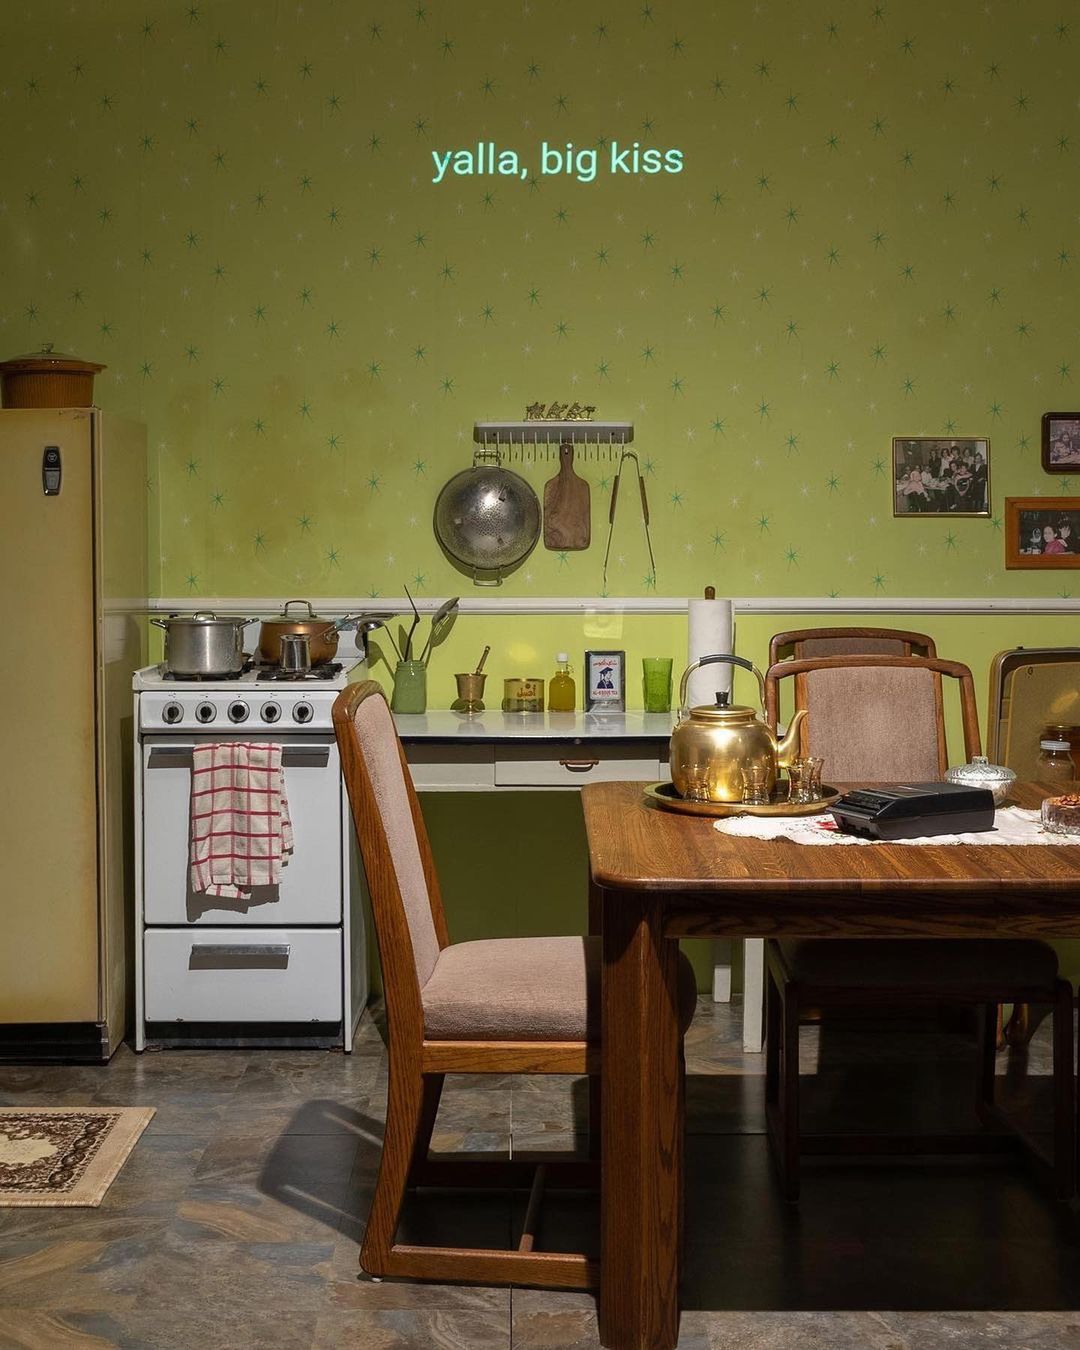 Still from “the sound of your voice is home”,  kitchen image with "yalla big kiss" written in the center